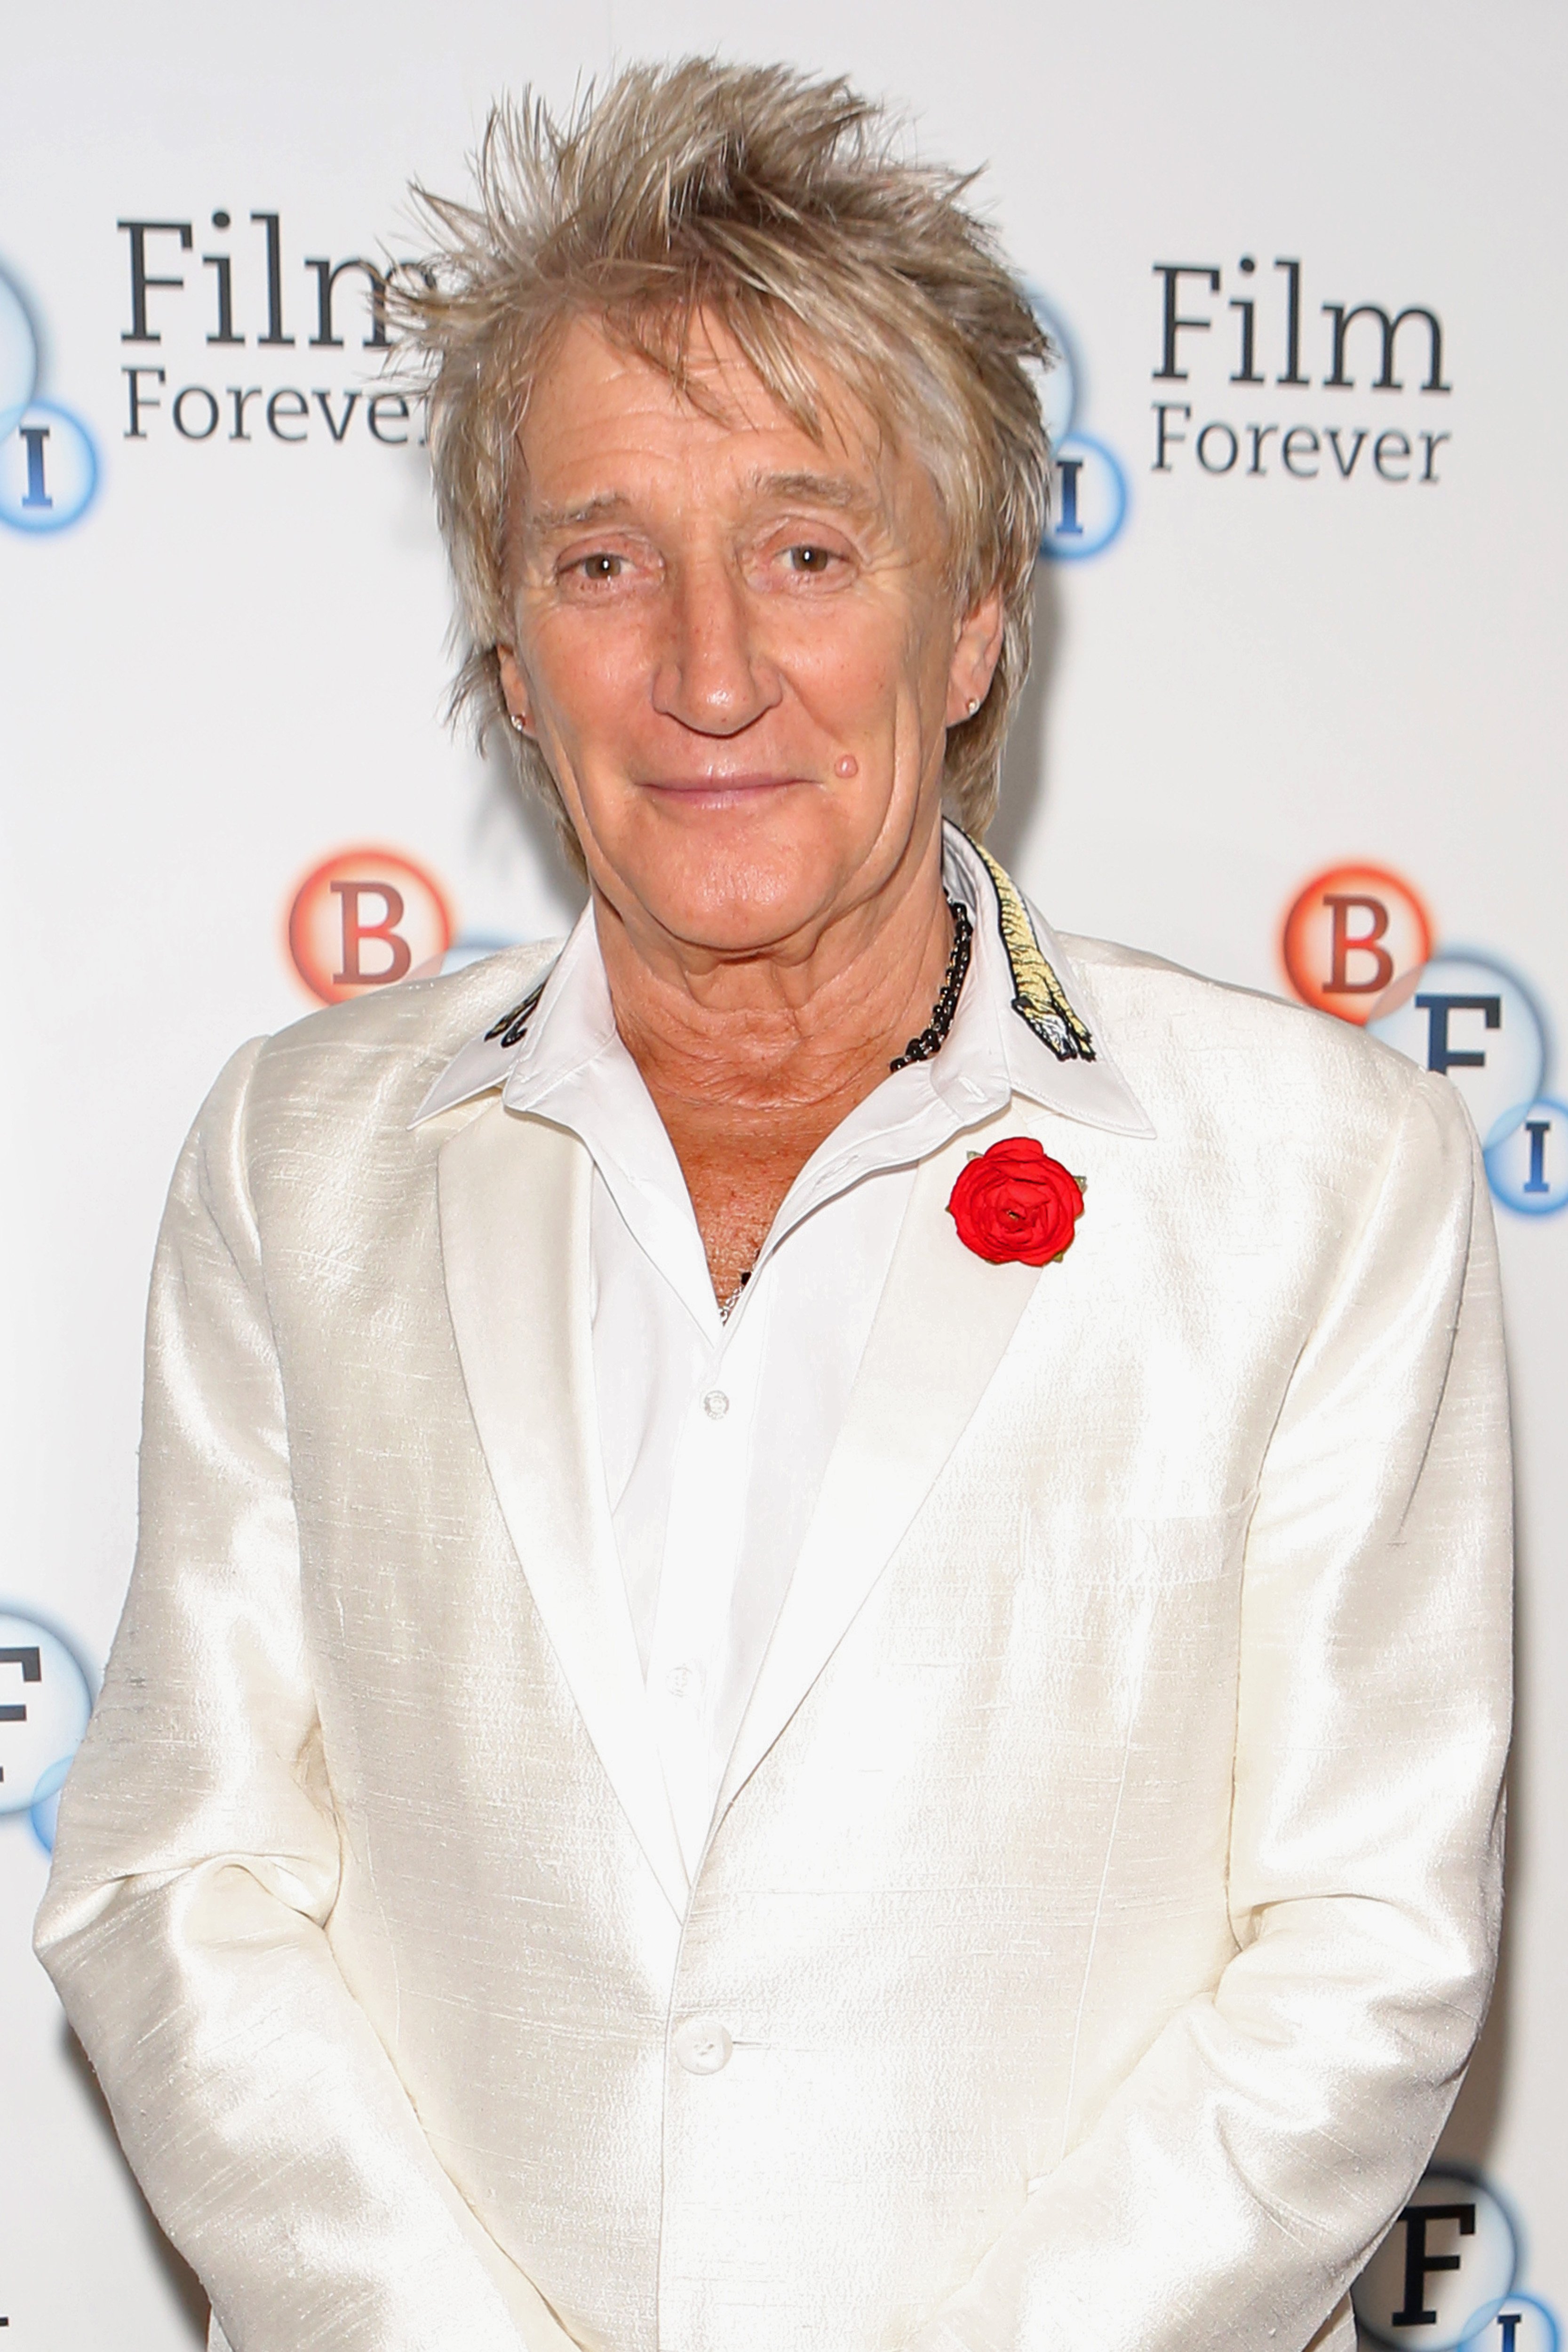  Rod Stewart attends a screening of "Rod The Mod" at BFI Southbank on April 21, 2018 | Photo: GettyImages